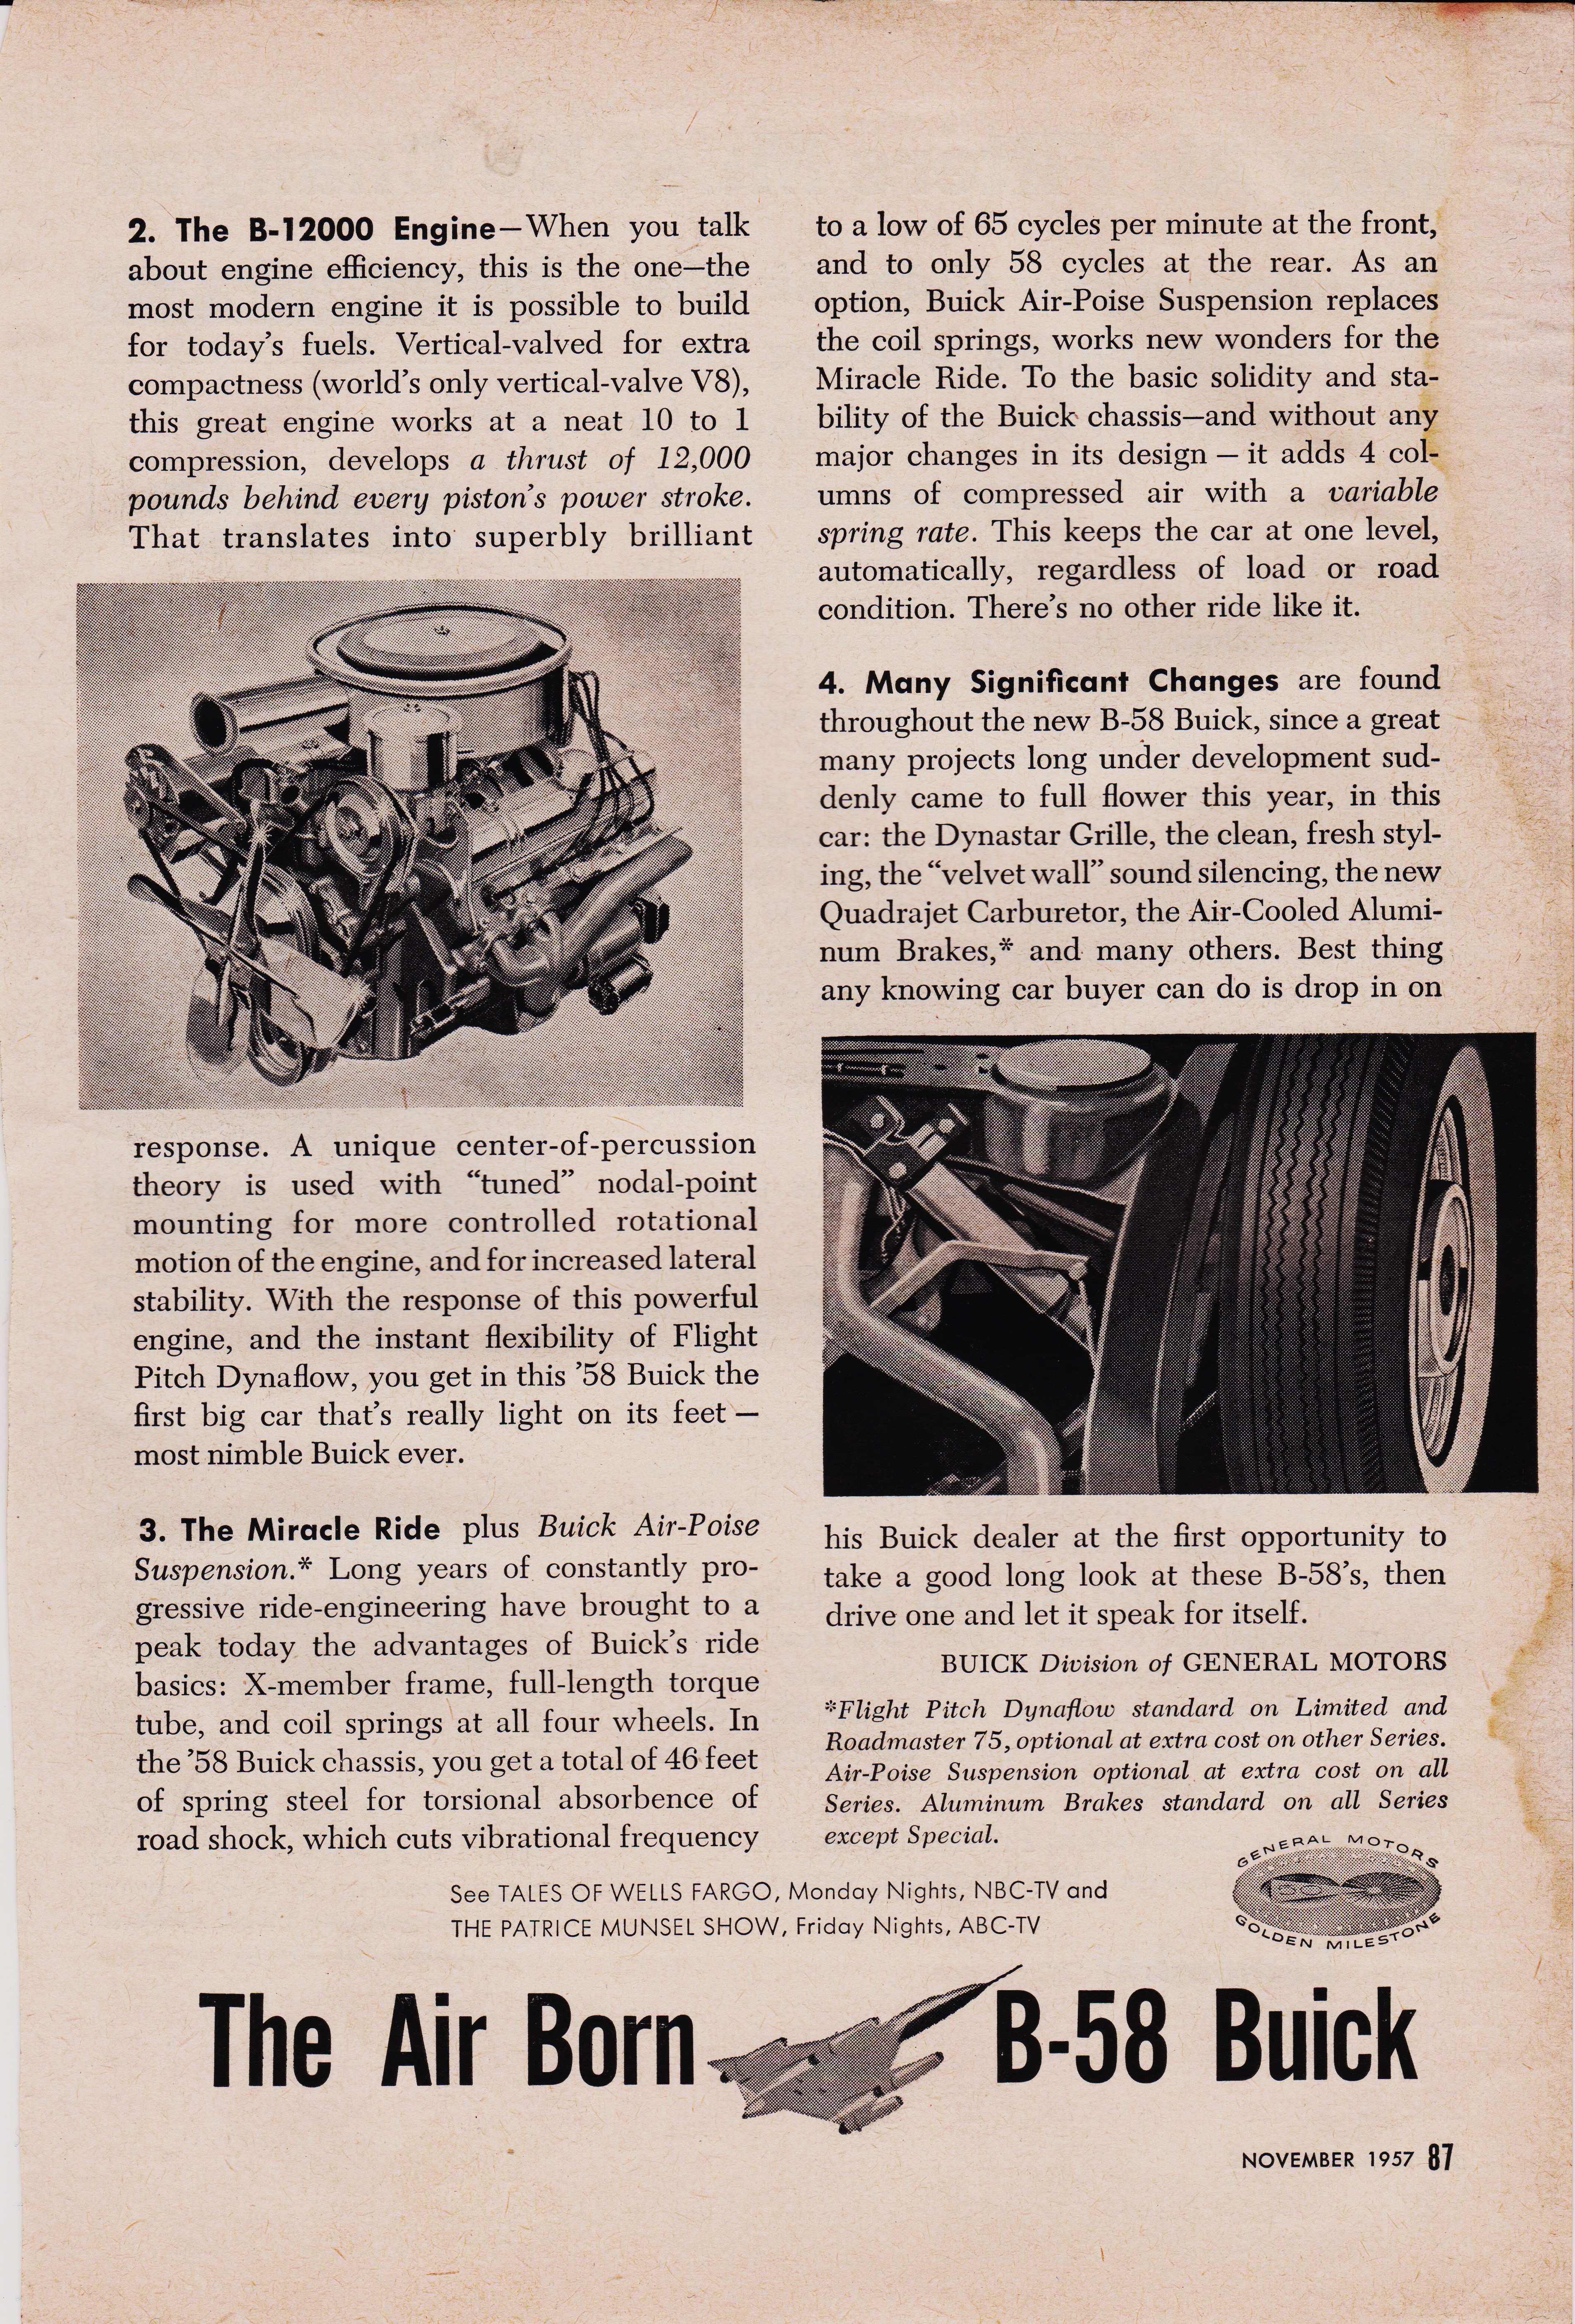 /images-American-Machinist-Oct-29-1942/Gears-and-Gear-Cutting-pg-1222-AM-Oct-29-1942-Instrument-Gears.jpeg